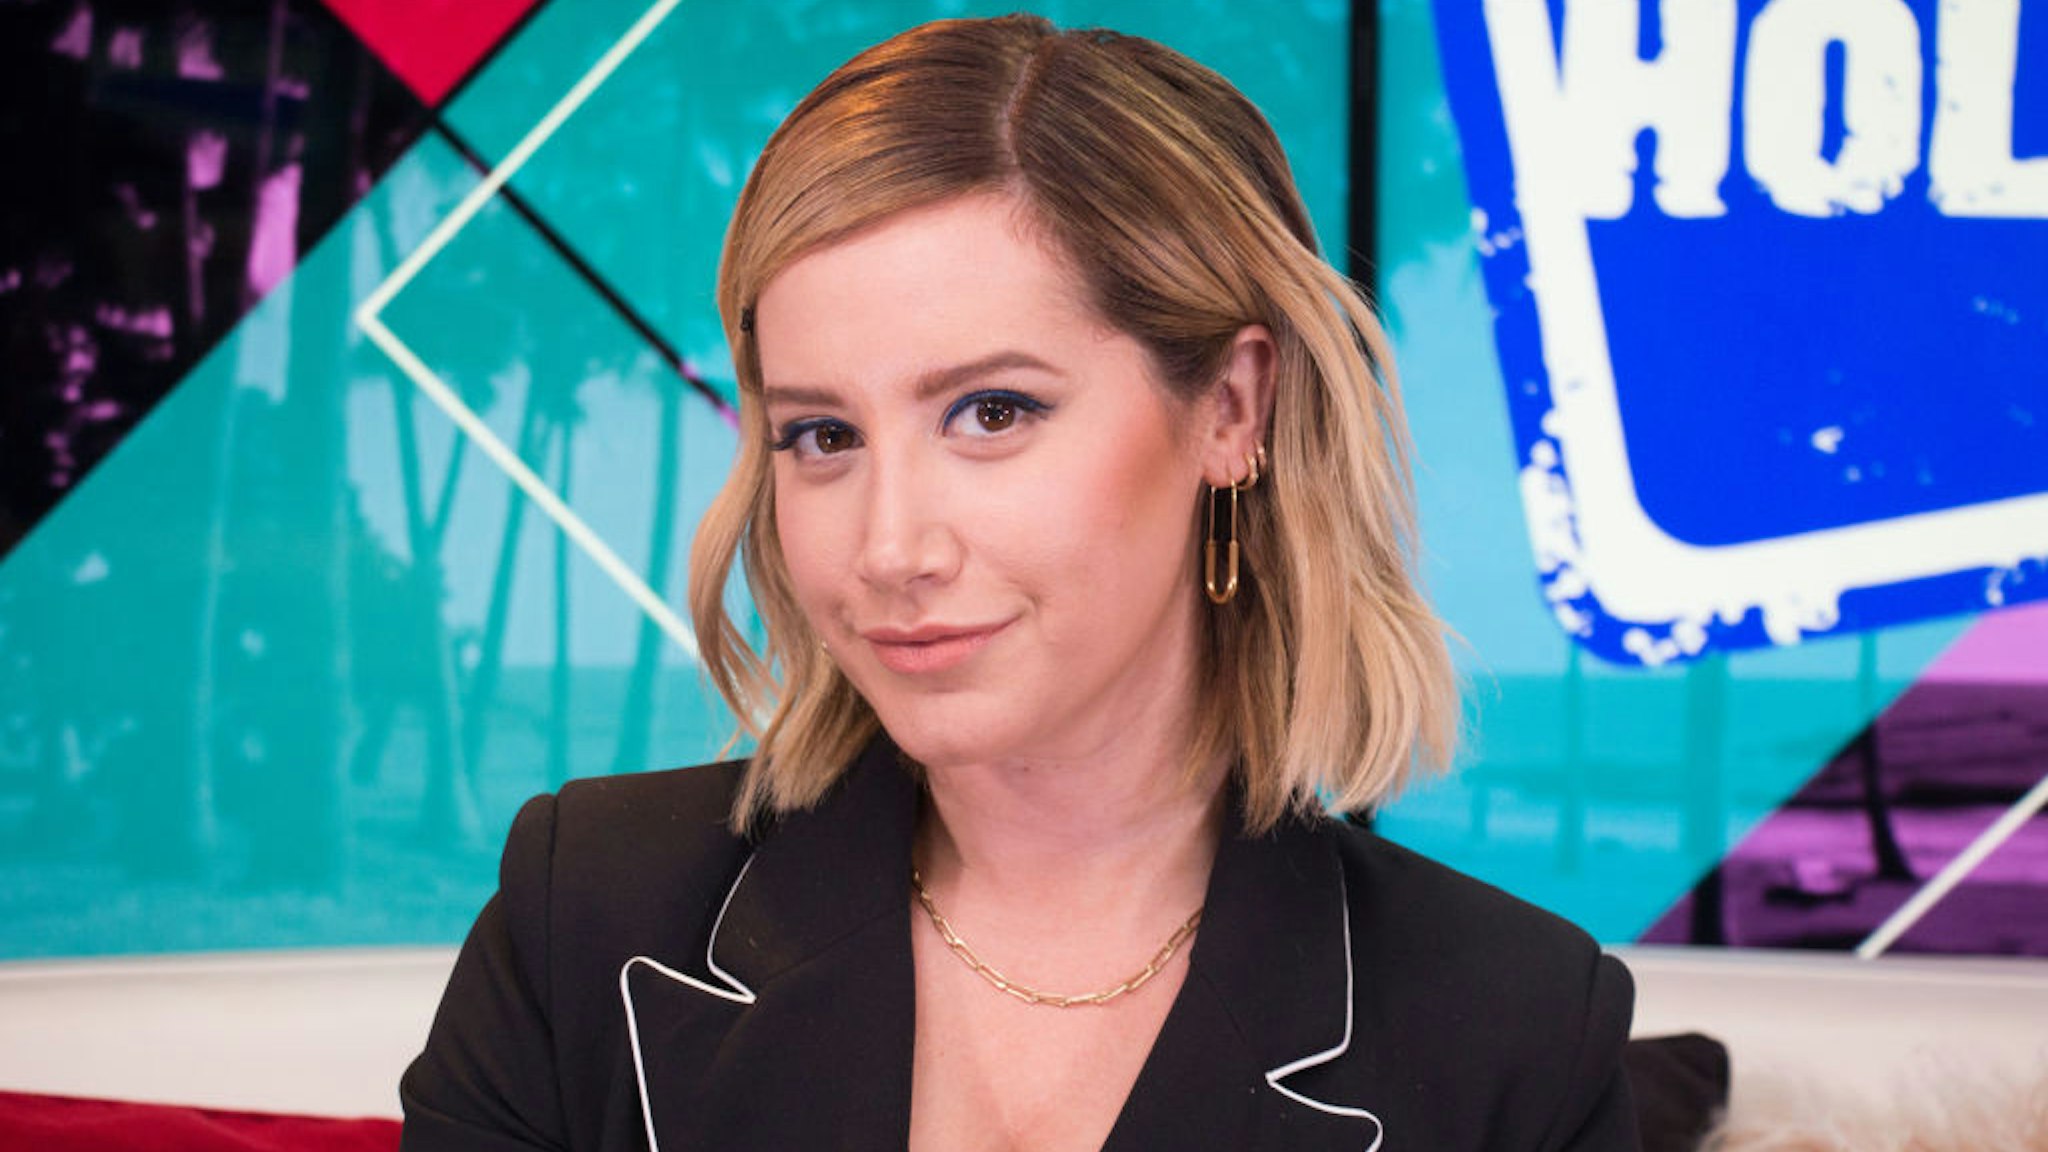 LOS ANGELES, CA - January 23: (EXCLUSIVE COVERAGE) Ashley Tisdale visits the Young Hollywood Studio on January 23, 2019 in Los Angeles, California. (Photo by Mary Clavering/Young Hollywood/Getty Images)